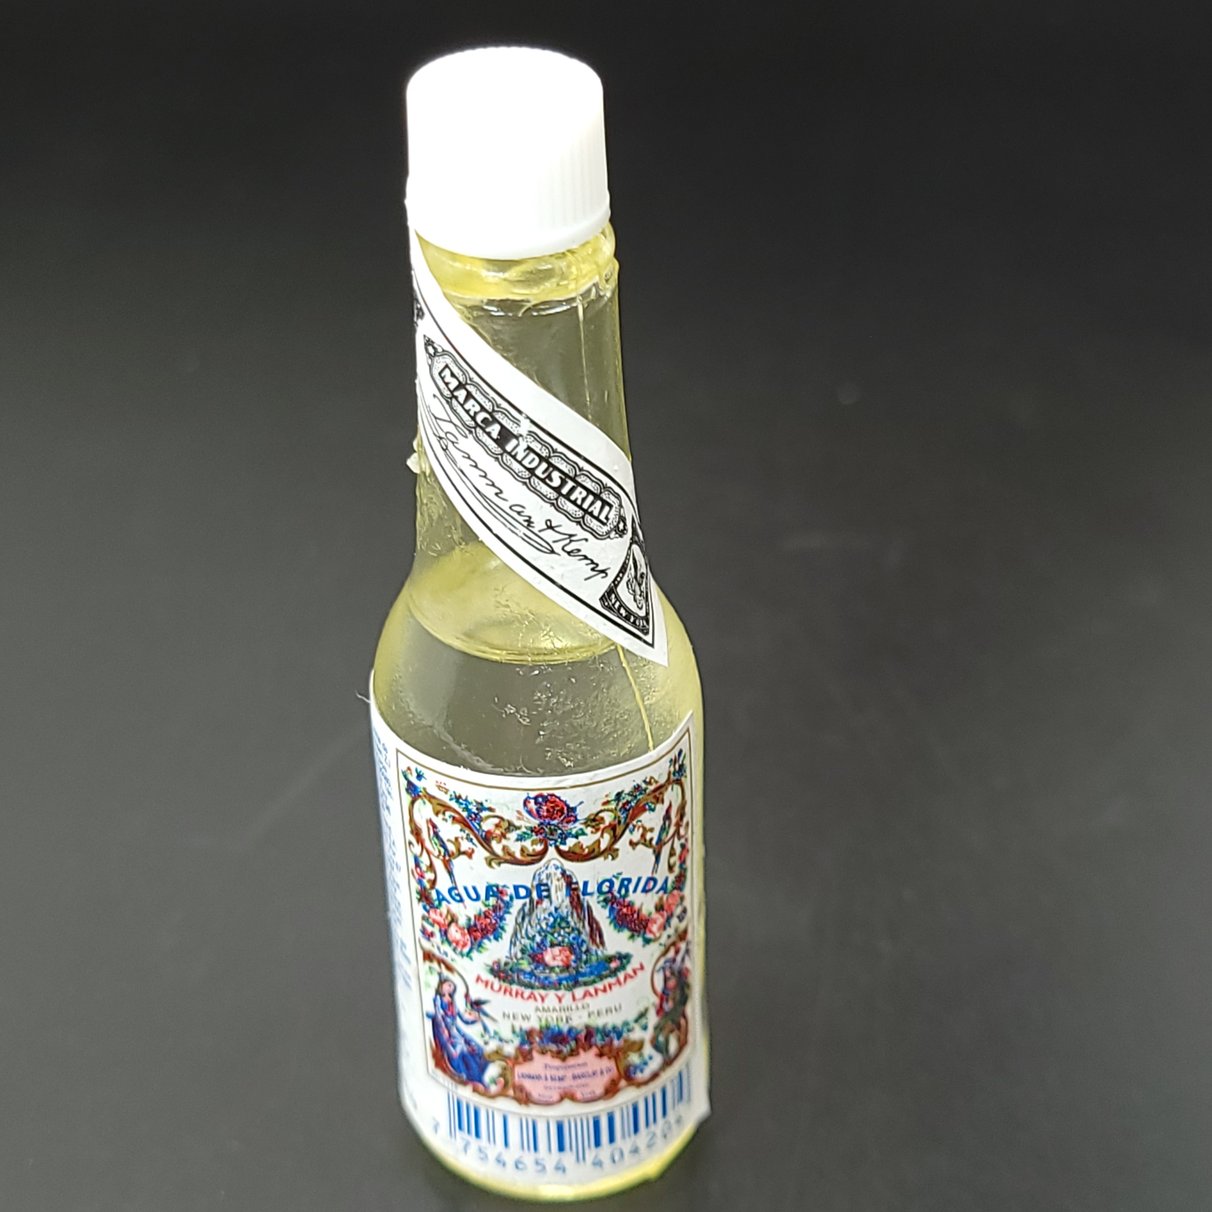 Florida Water from Peru 22ml Pocket Sample Size Spiritual Cologne - Elevated Metaphysical